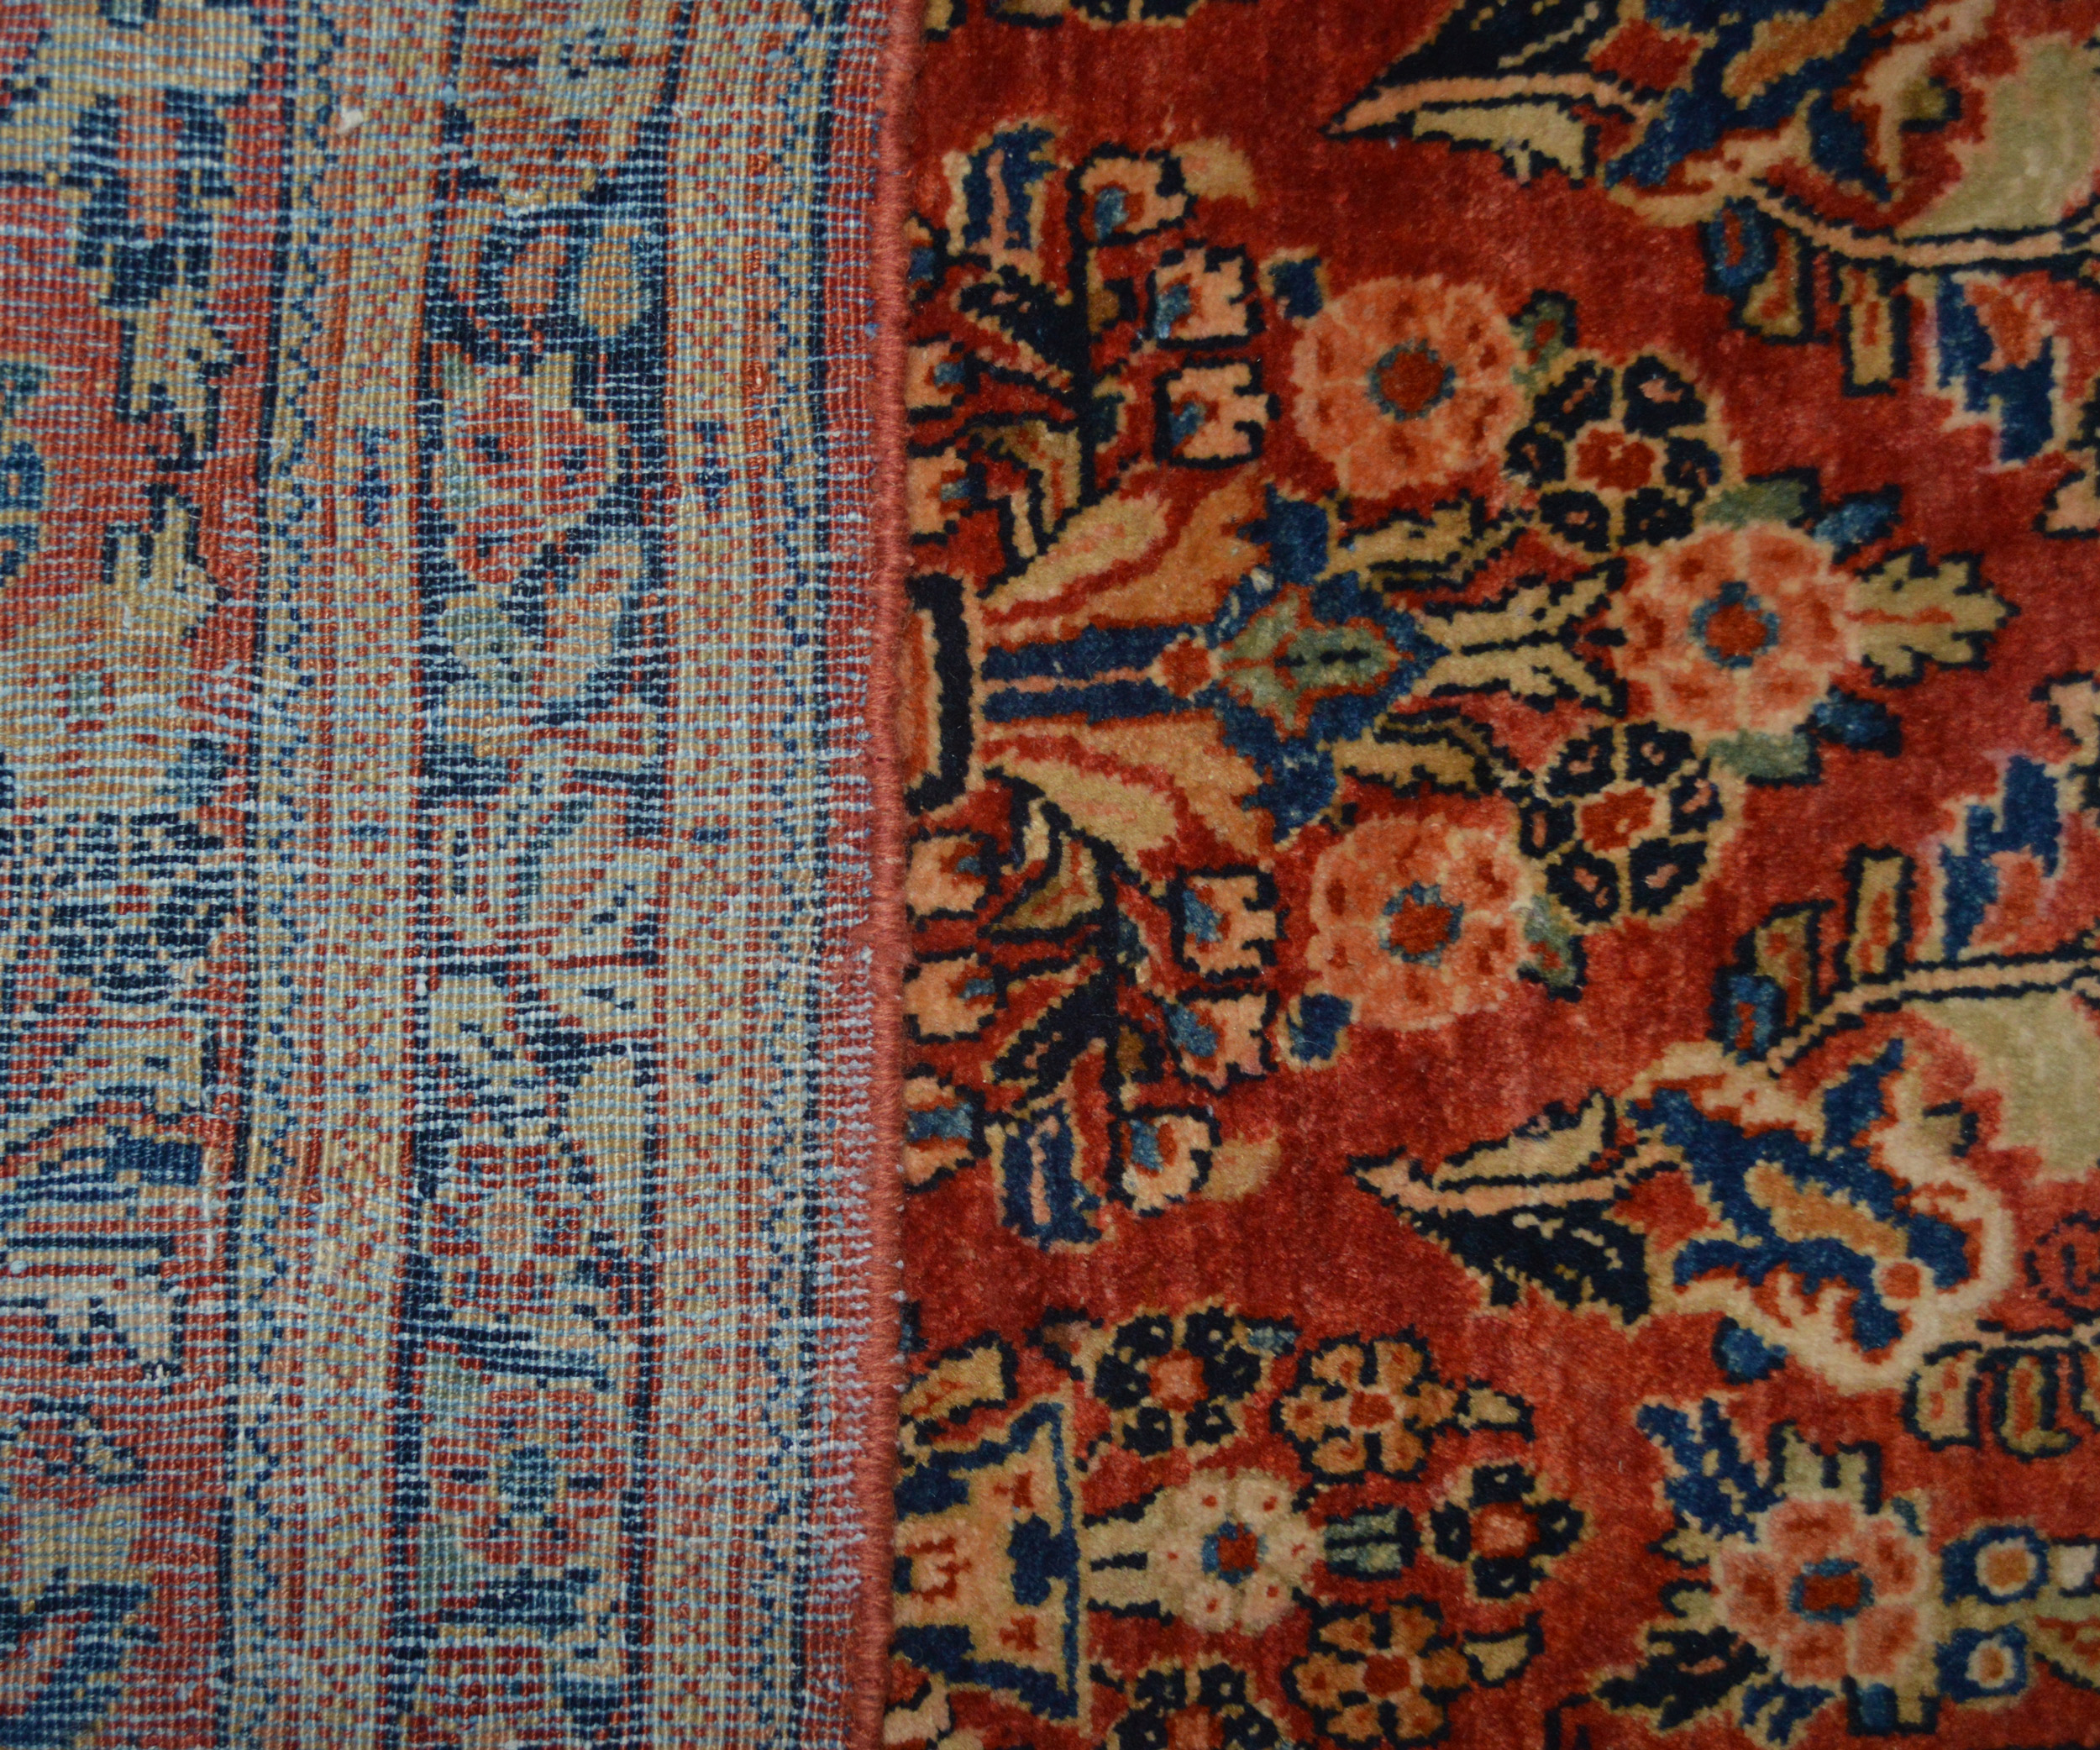 Weave detail from a vintage Persian Sarouk runner rug, Douglas Stock Gallery, Oriental rugs Boston,Ma area, South Natick,MA